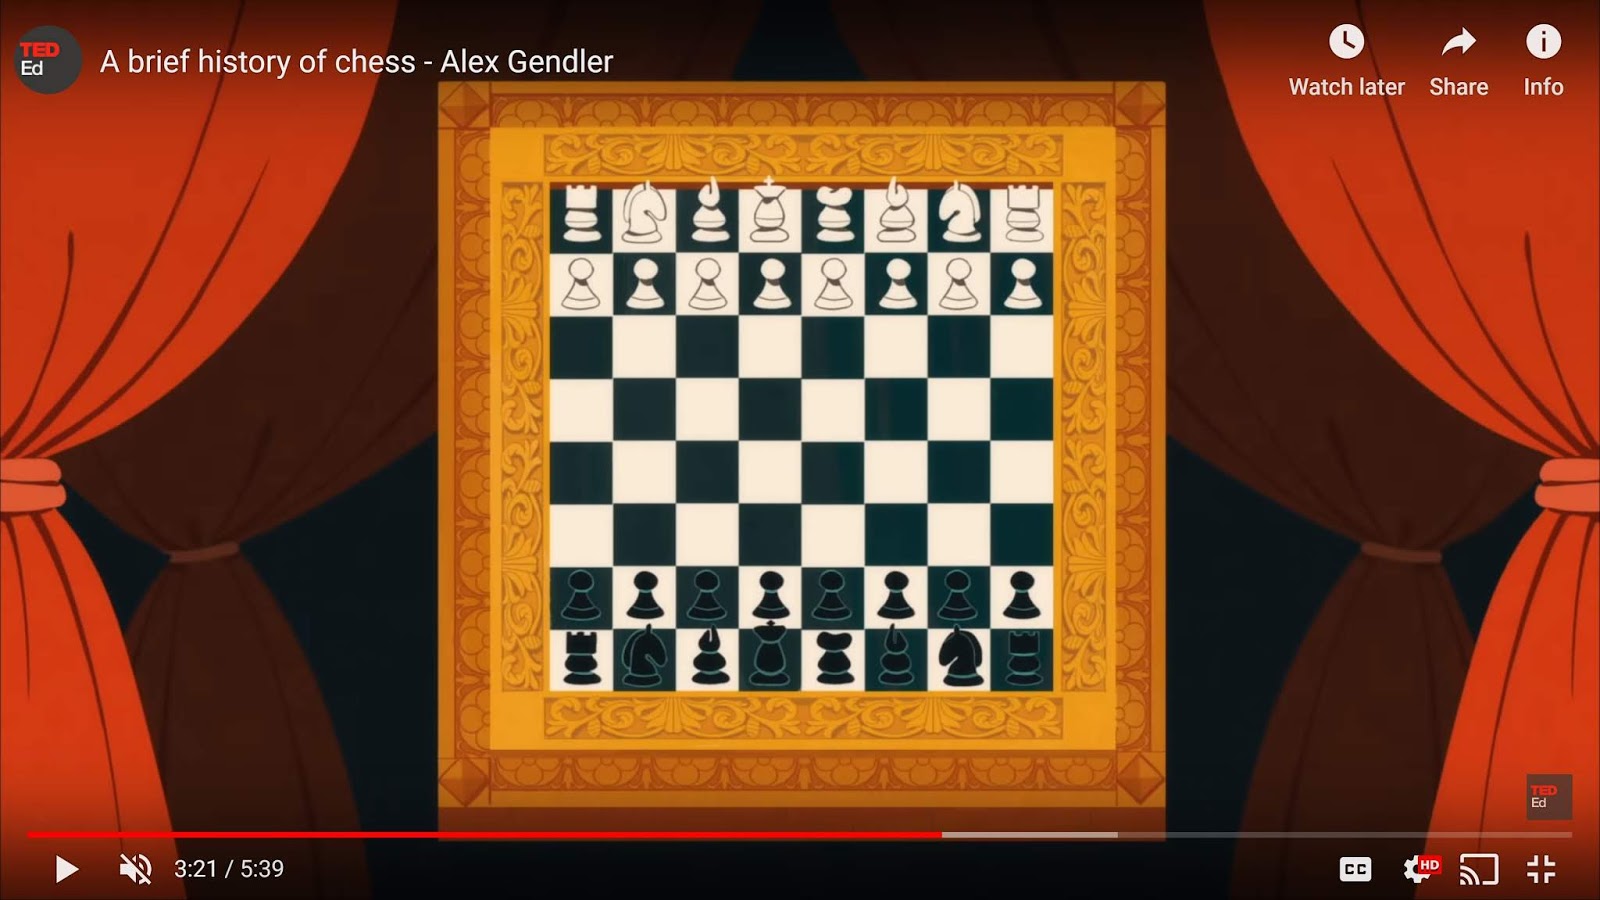 iChess.net on X: Many aggressive chess openings do not require you to give  up some material. However, a gambit chess opening involves sacrificing  material. Choosing between the two depends largely on your